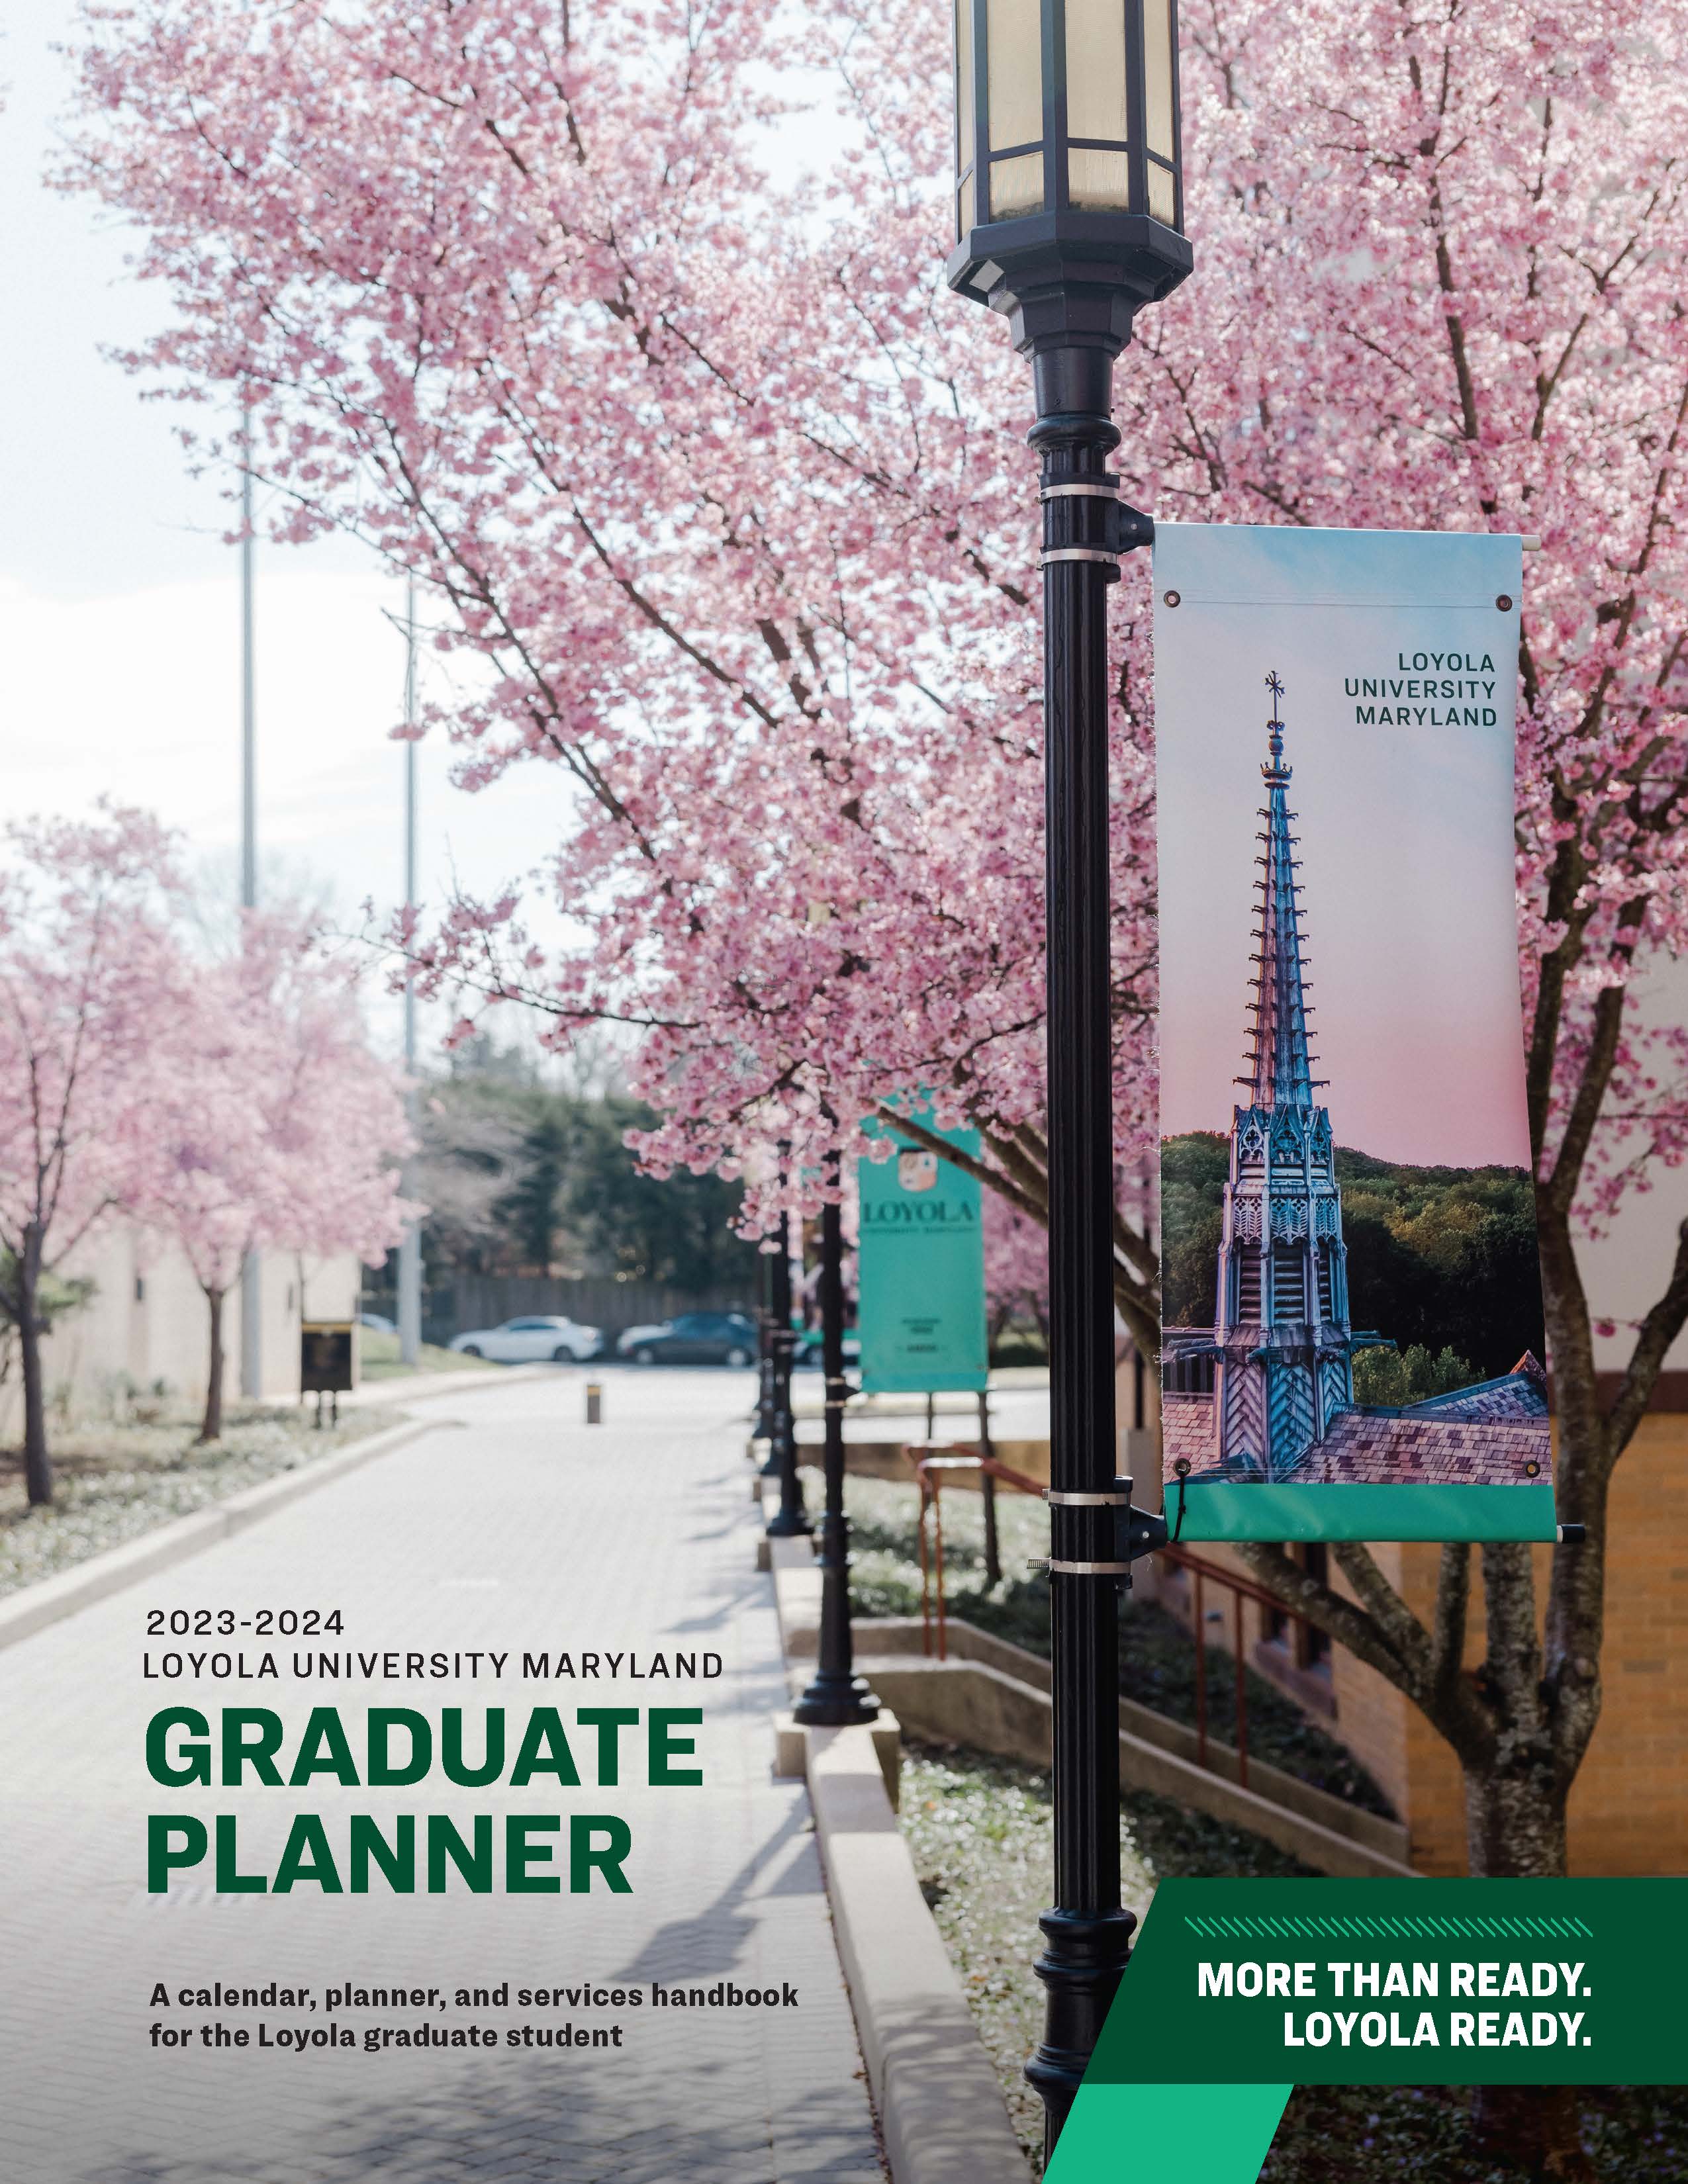 Cover of graduate planner depicting cherry blossoms